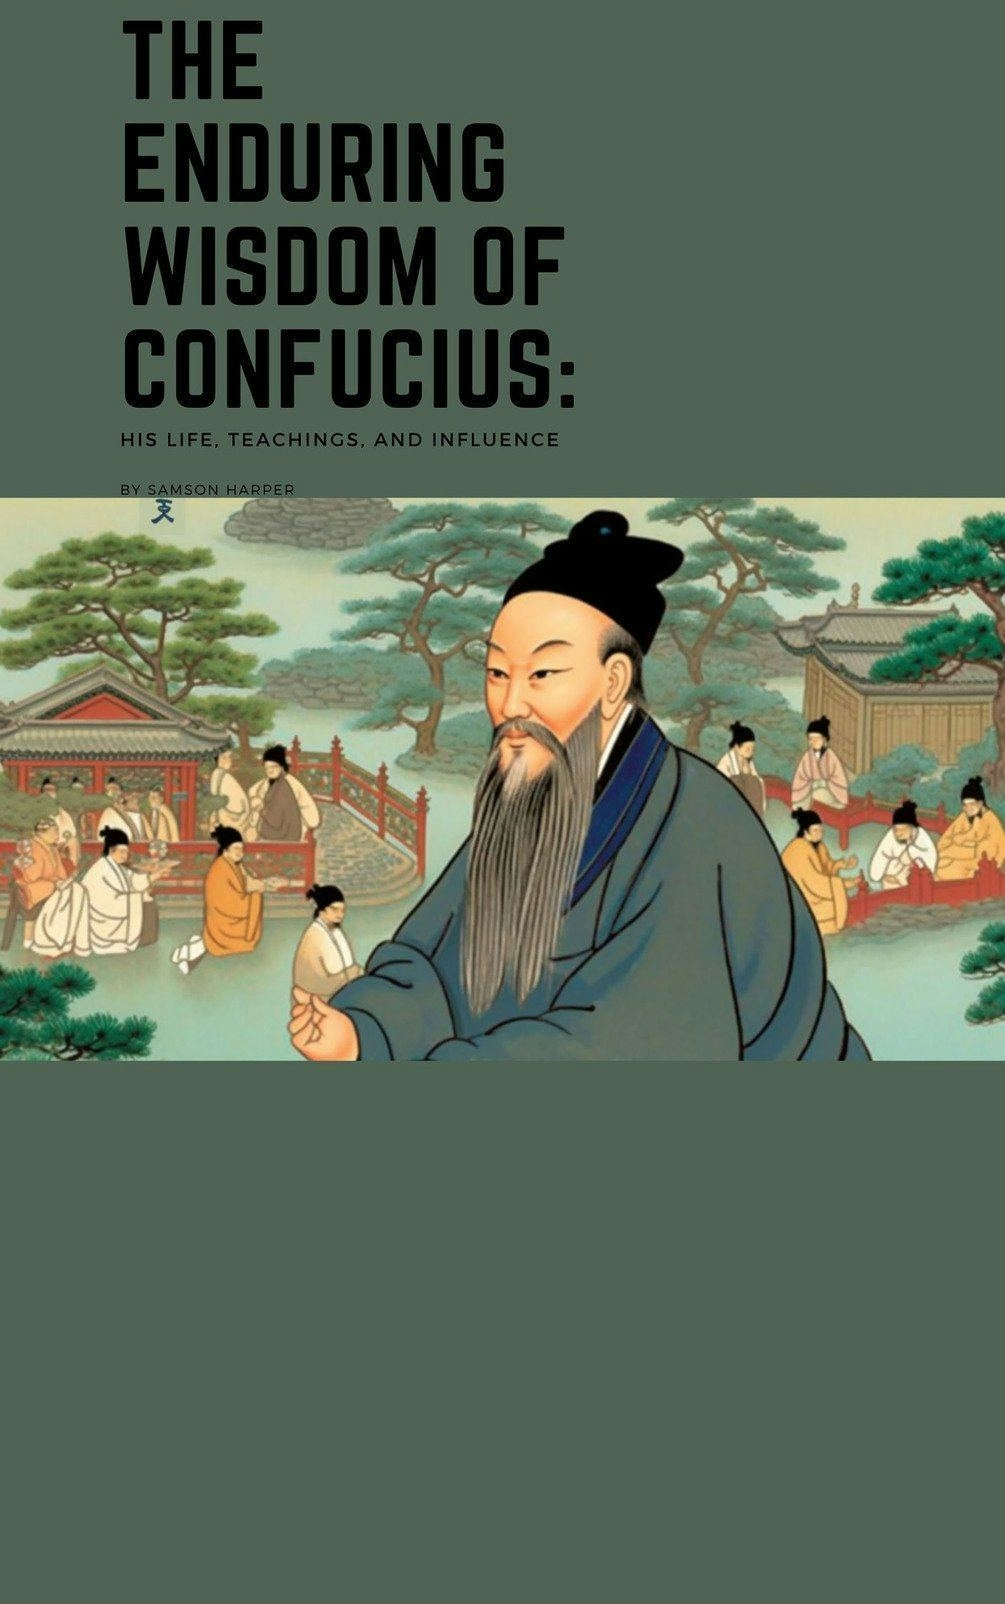 The Enduring Wisdom of Confucius: His Life, Teachings, and Influence